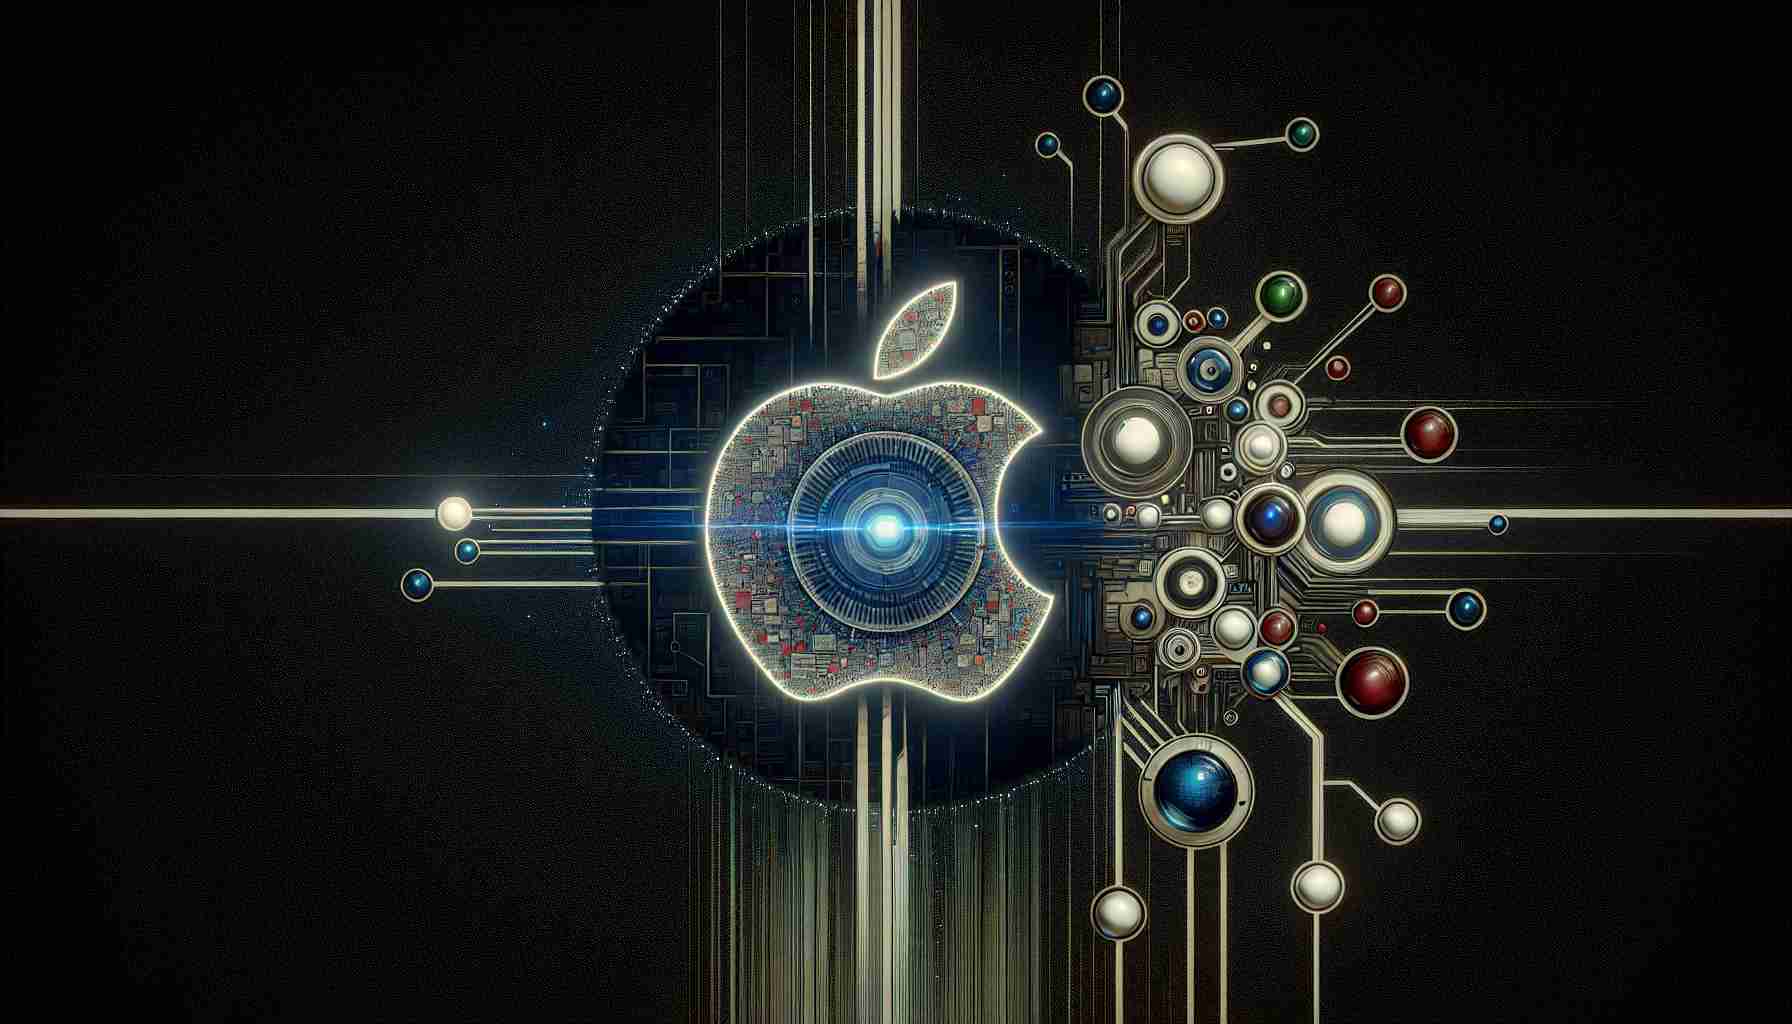 Apple Unveils “Apple Intelligence”: Innovating in AI, but With a Taste of Caution